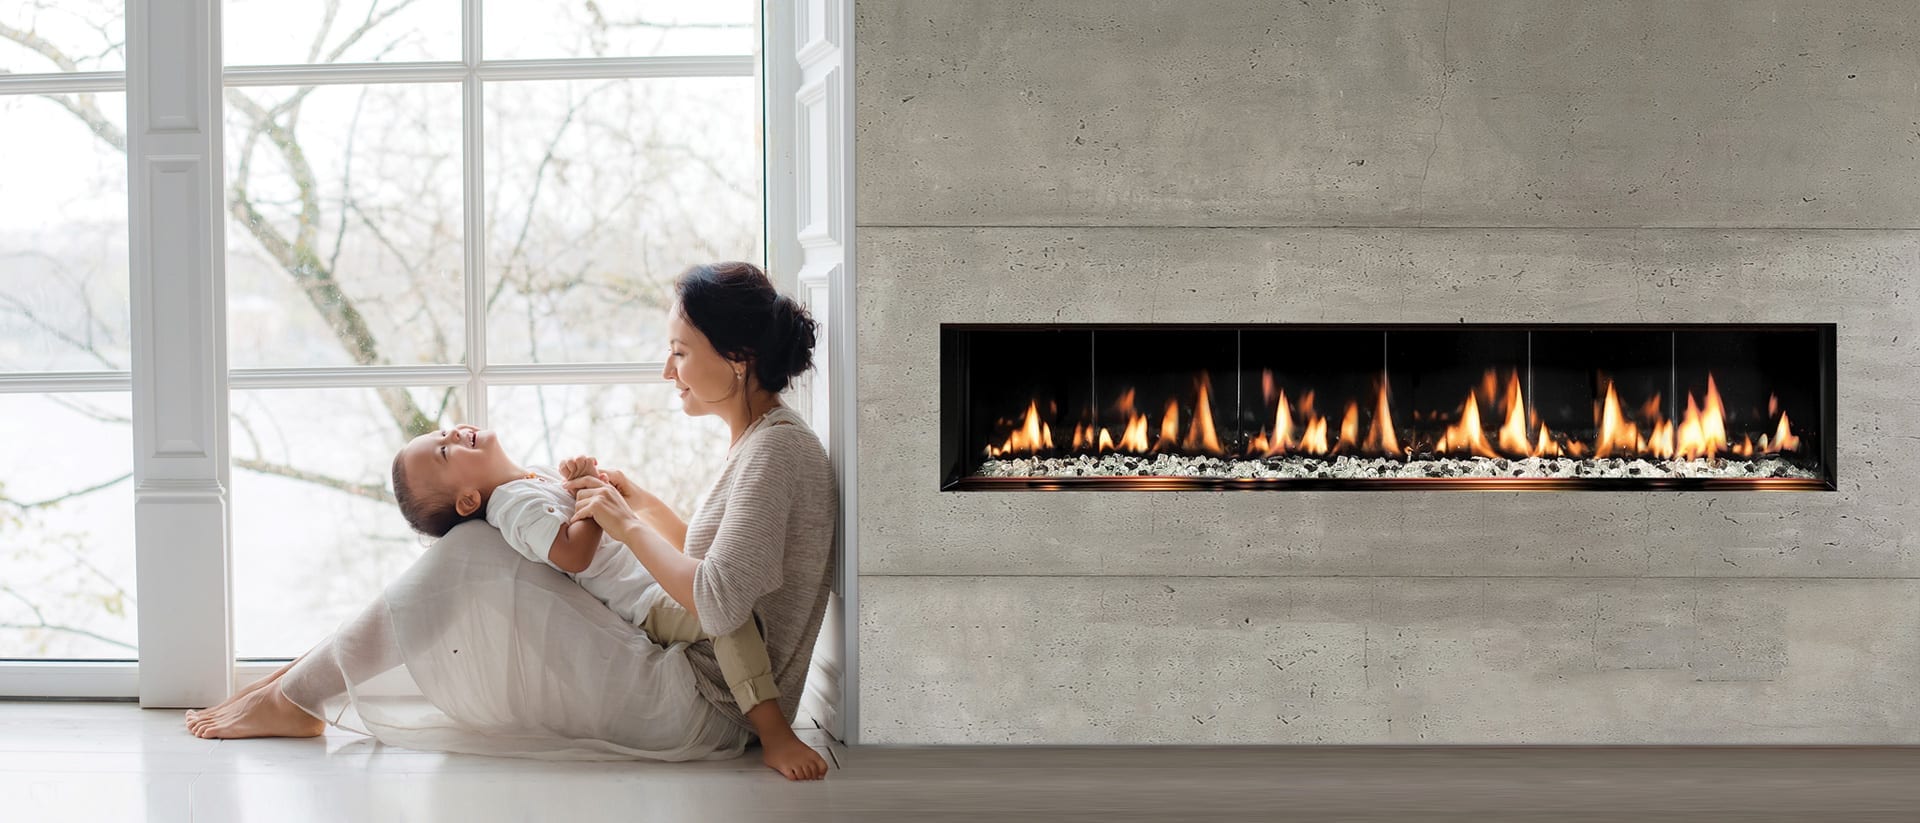 SIXTY0 Built-In Fireplace